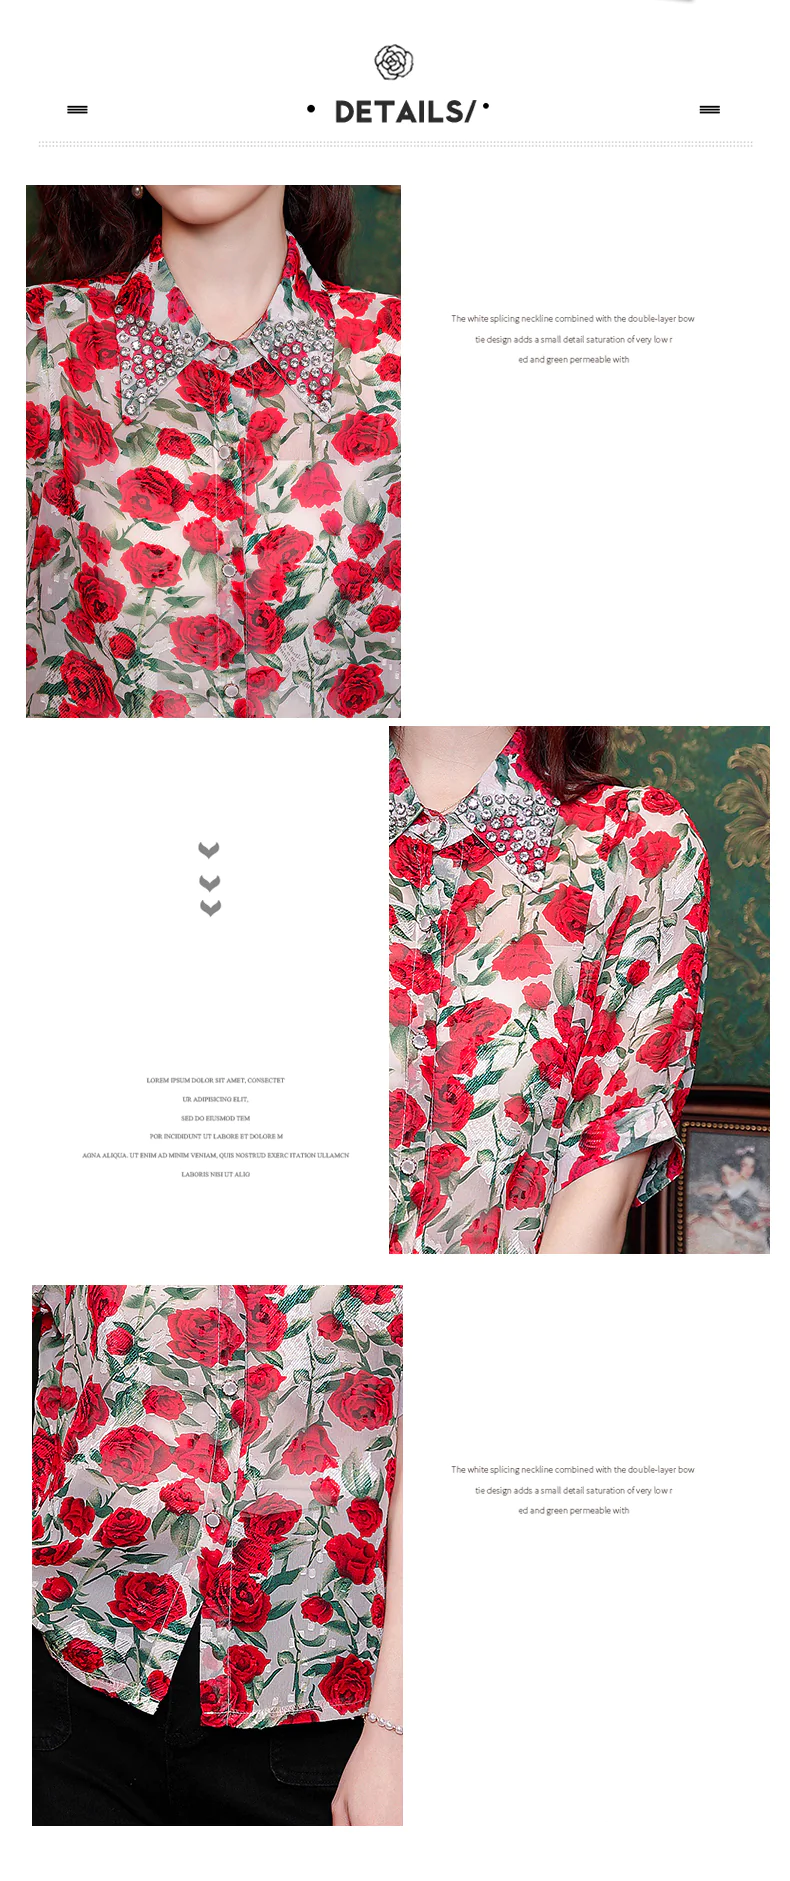 Womens-Fashionable-Red-Floral-Printed-Chiffon-Casual-Shirt-Blouse10